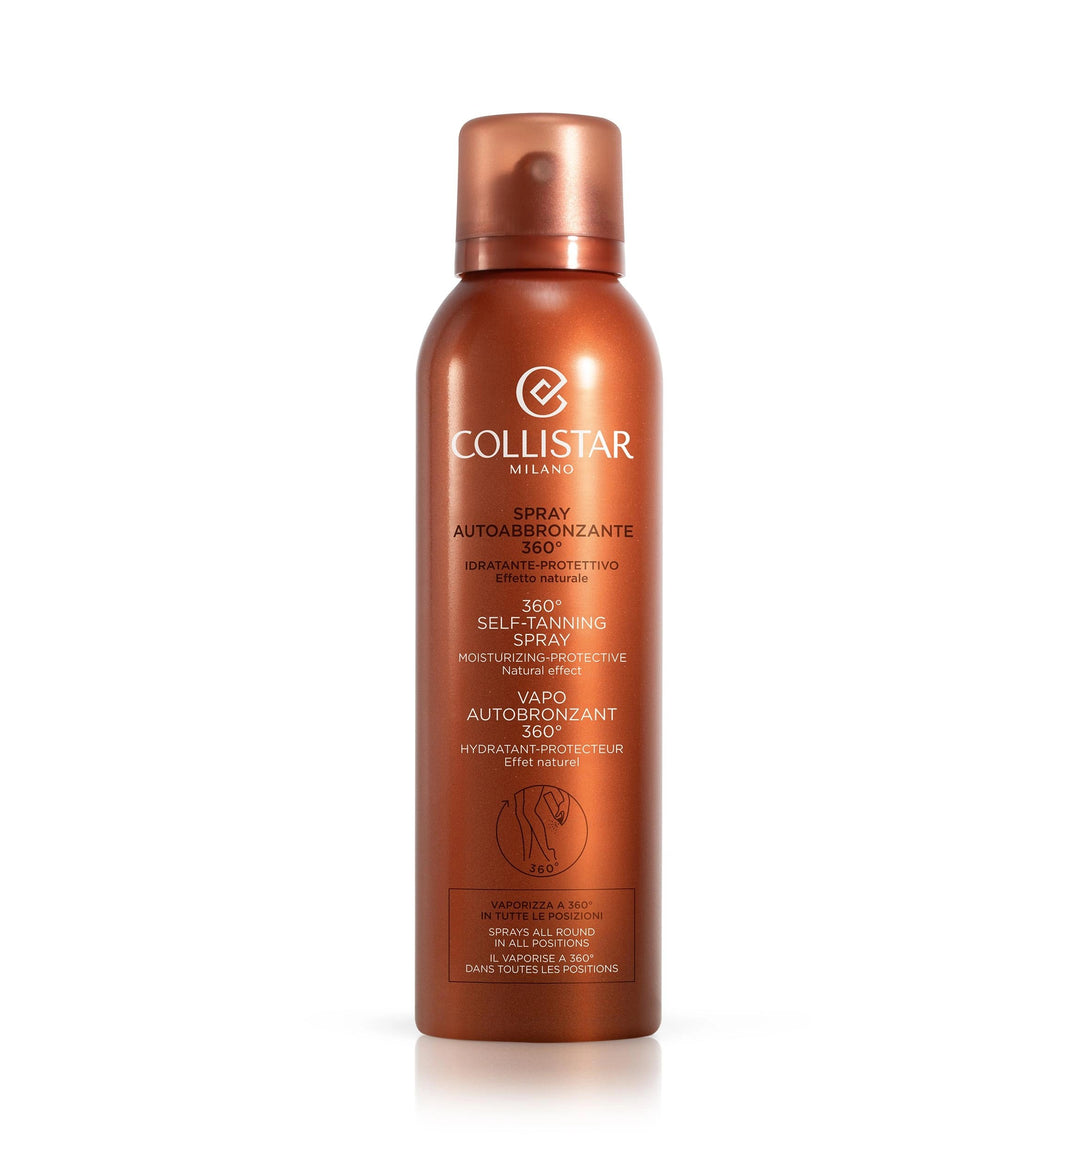 

Collistar Self-Tanning Spray 360° Moisturizing and Protective Natural Effect 150 ml